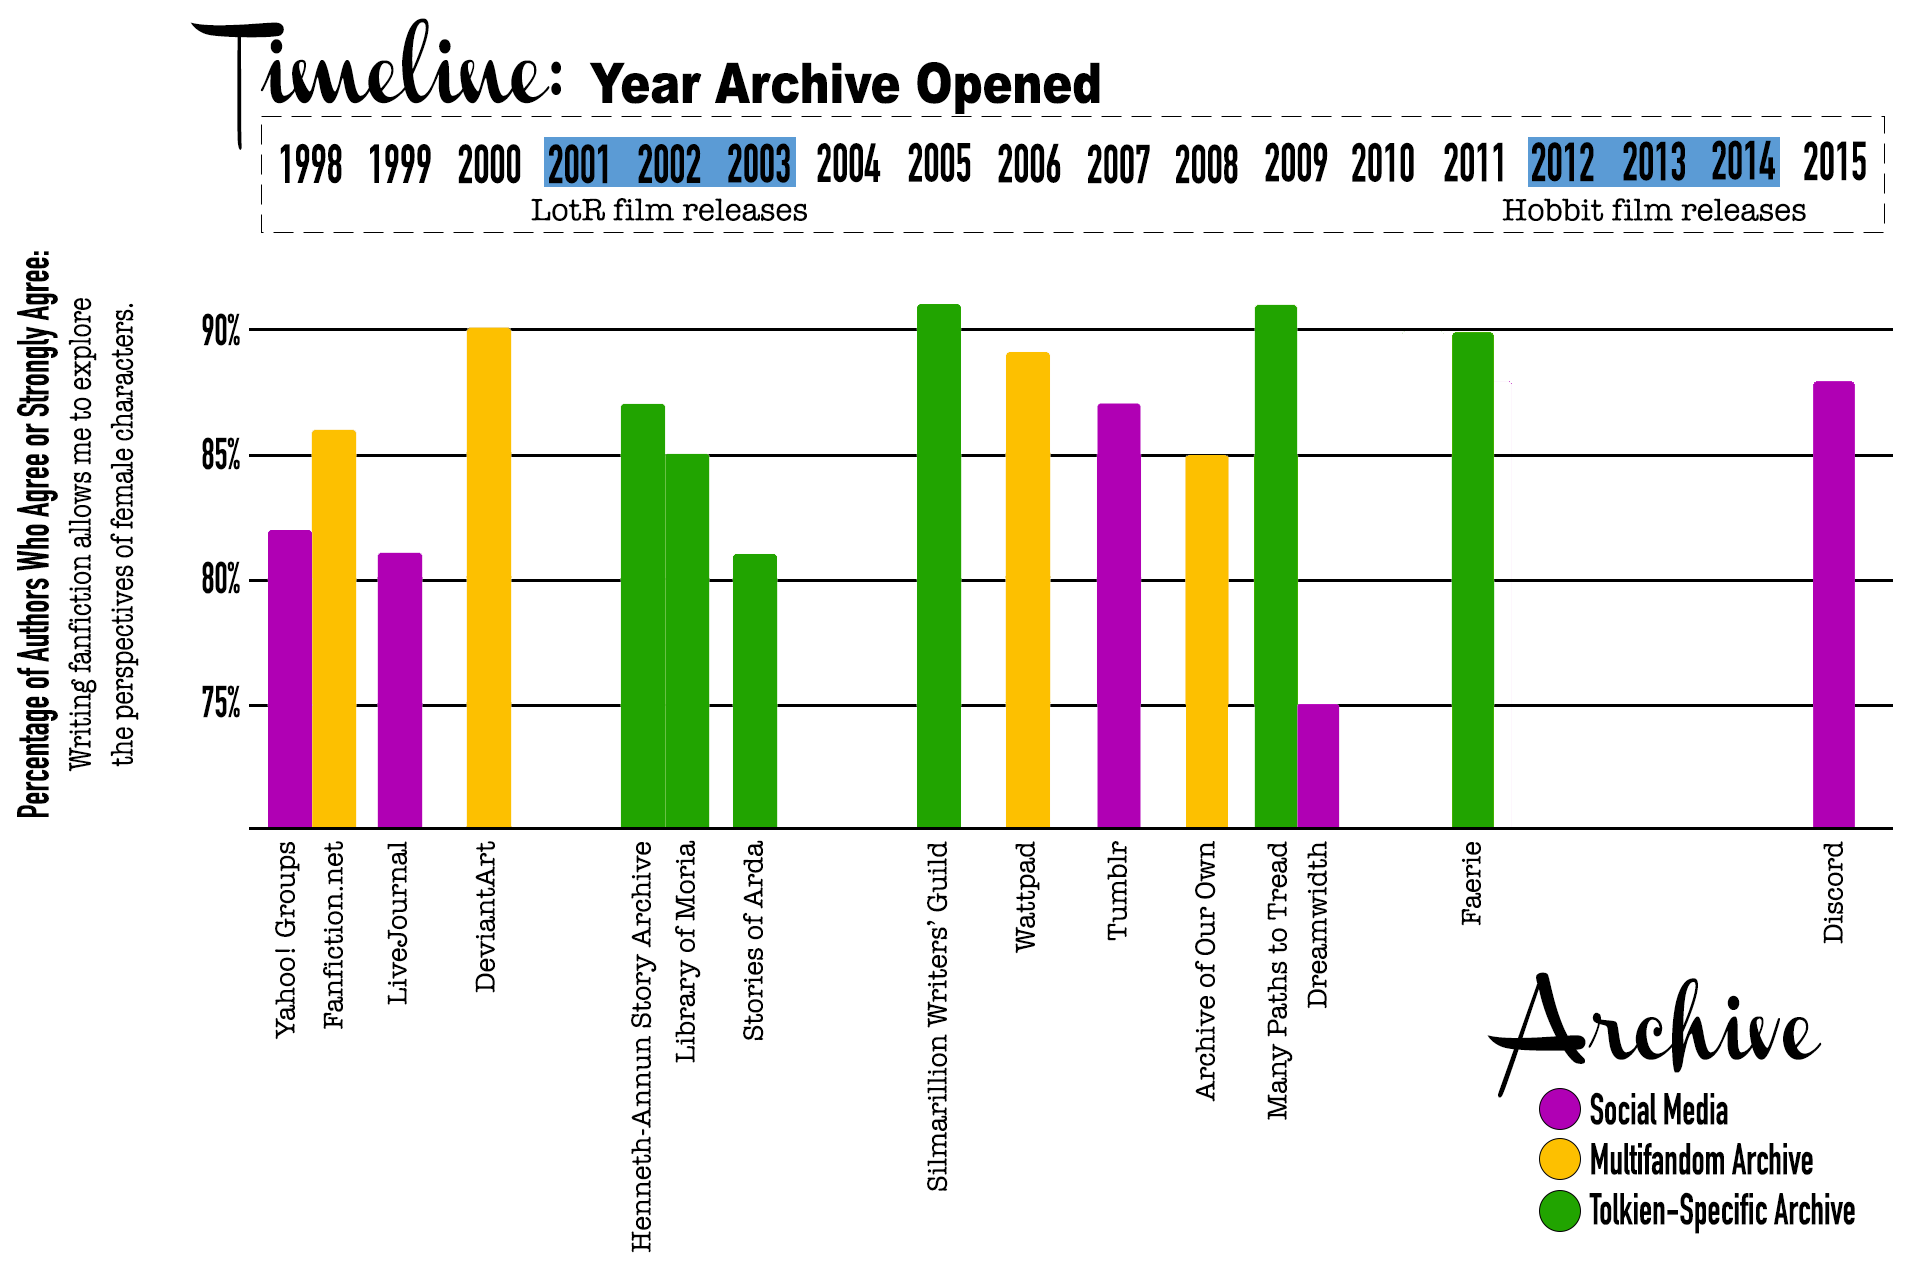 Timeline shows the percentage of authors who agreed with the statement "Writing fanfiction allows me to explore the perspective of female characters" based on the archive(s) or platform(s) they use. Archives and platforms are arranged in chronological order based on the date they opened: Yahoo! Groups (1998) 82%, Fanfiction.net (1998) 86%, LiveJournal (1999) 81%, DeviantArt (2000) 90%, Henneth-Annûn Story Archive (2002) 87%, Library of Moria (2002) 85%, Stories of Arda (2003) 81%, Silmarillion Writers' Guild (2005) 91%, Wattpad (2006) 89%, Tumblr (2007) 87%, Archive of Our Own (2008) 85%, Many Paths to Tread (2009) 91%, Dreamwidth (2009) 75%, Faerie (2011) 90%, Discord (2015) 88%